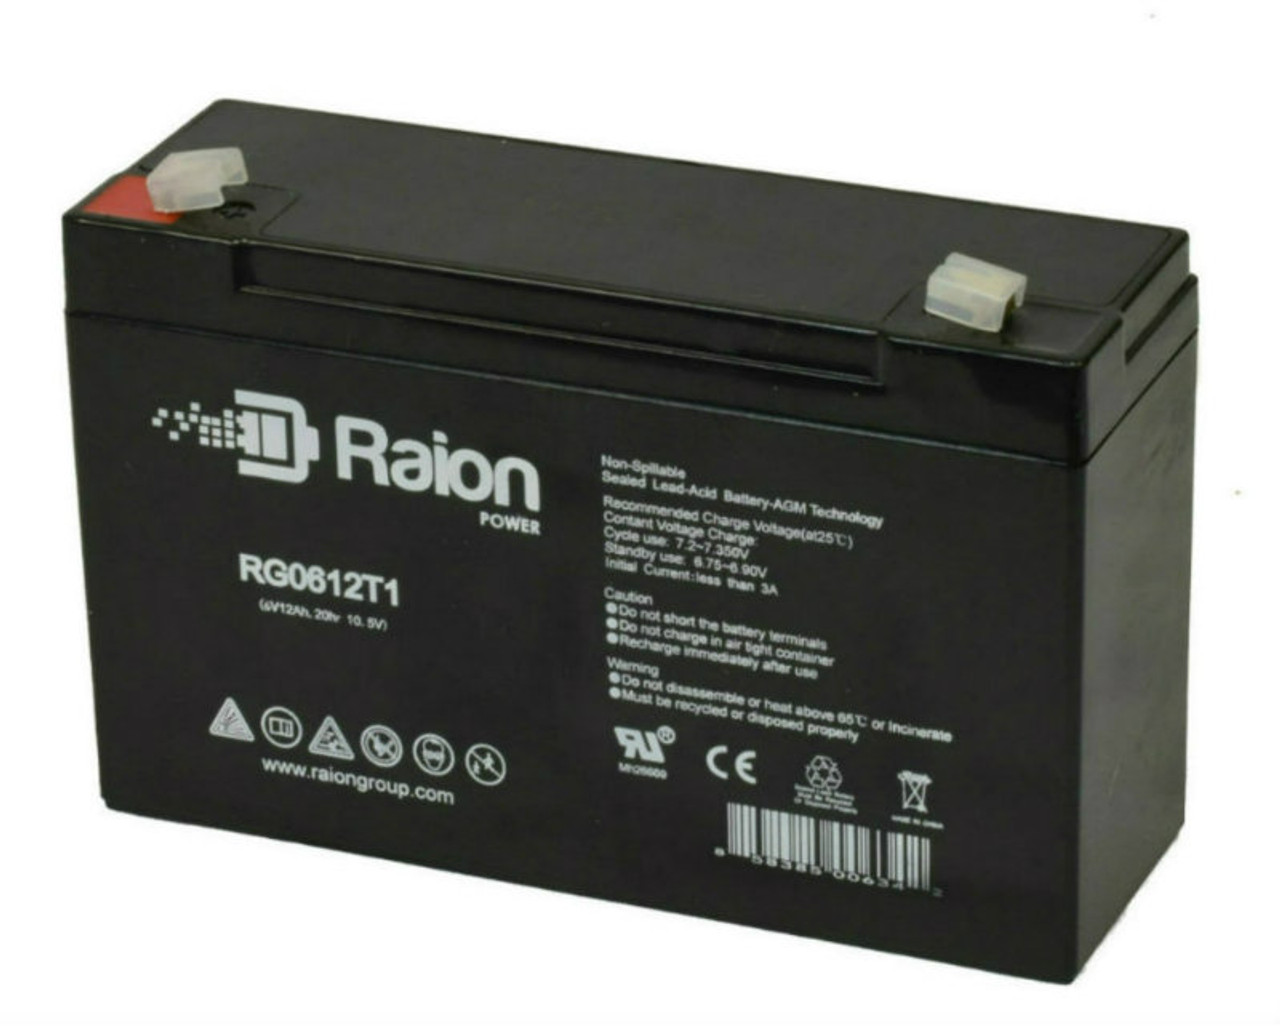 Raion Power RG06120T1 Replacement Battery for Teledyne Big Beam H2SC6S16